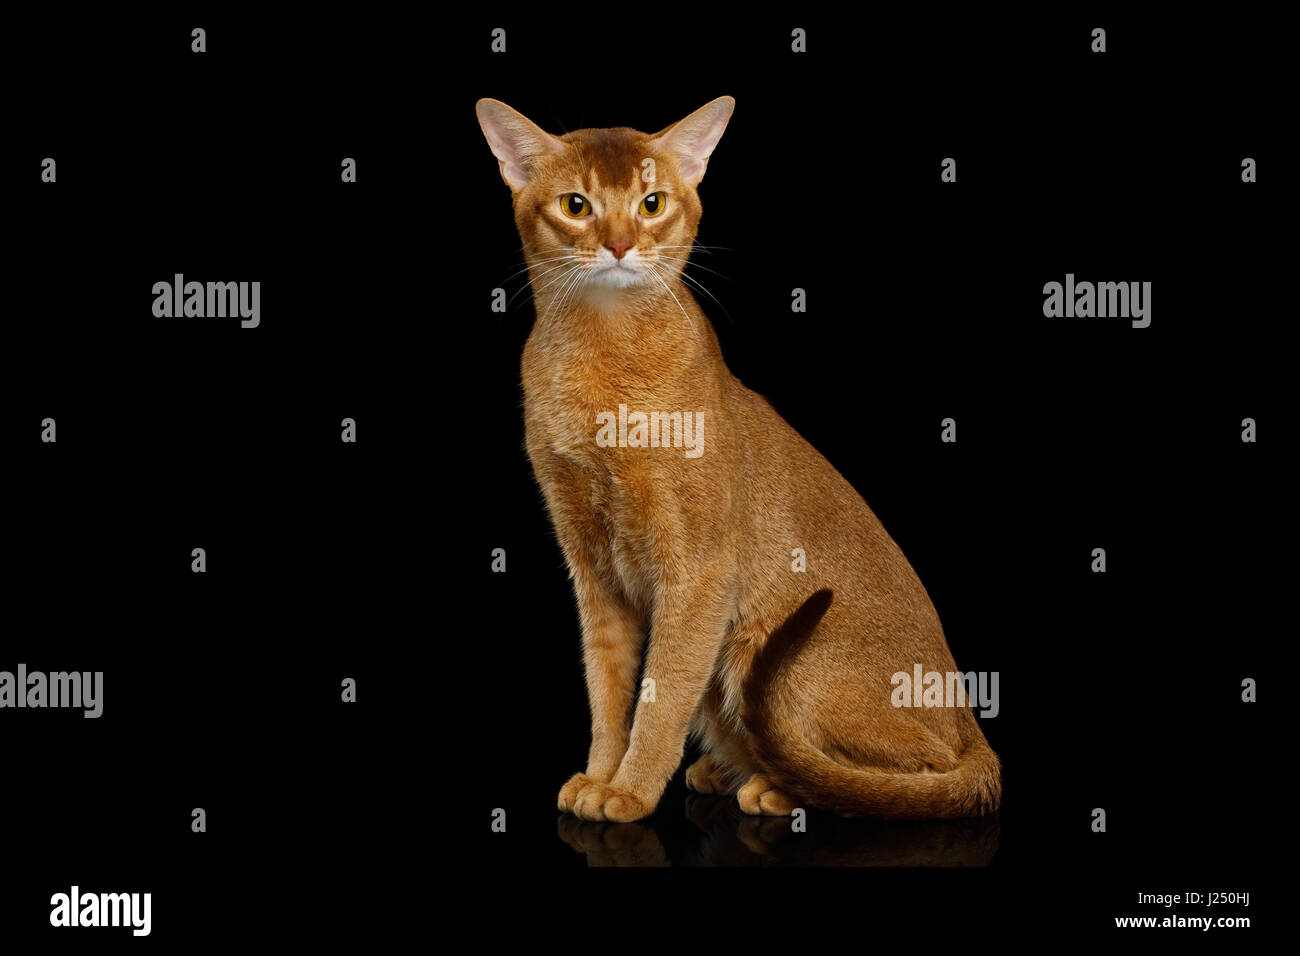 Purebred abyssinian cat isolated on black background Stock Photo